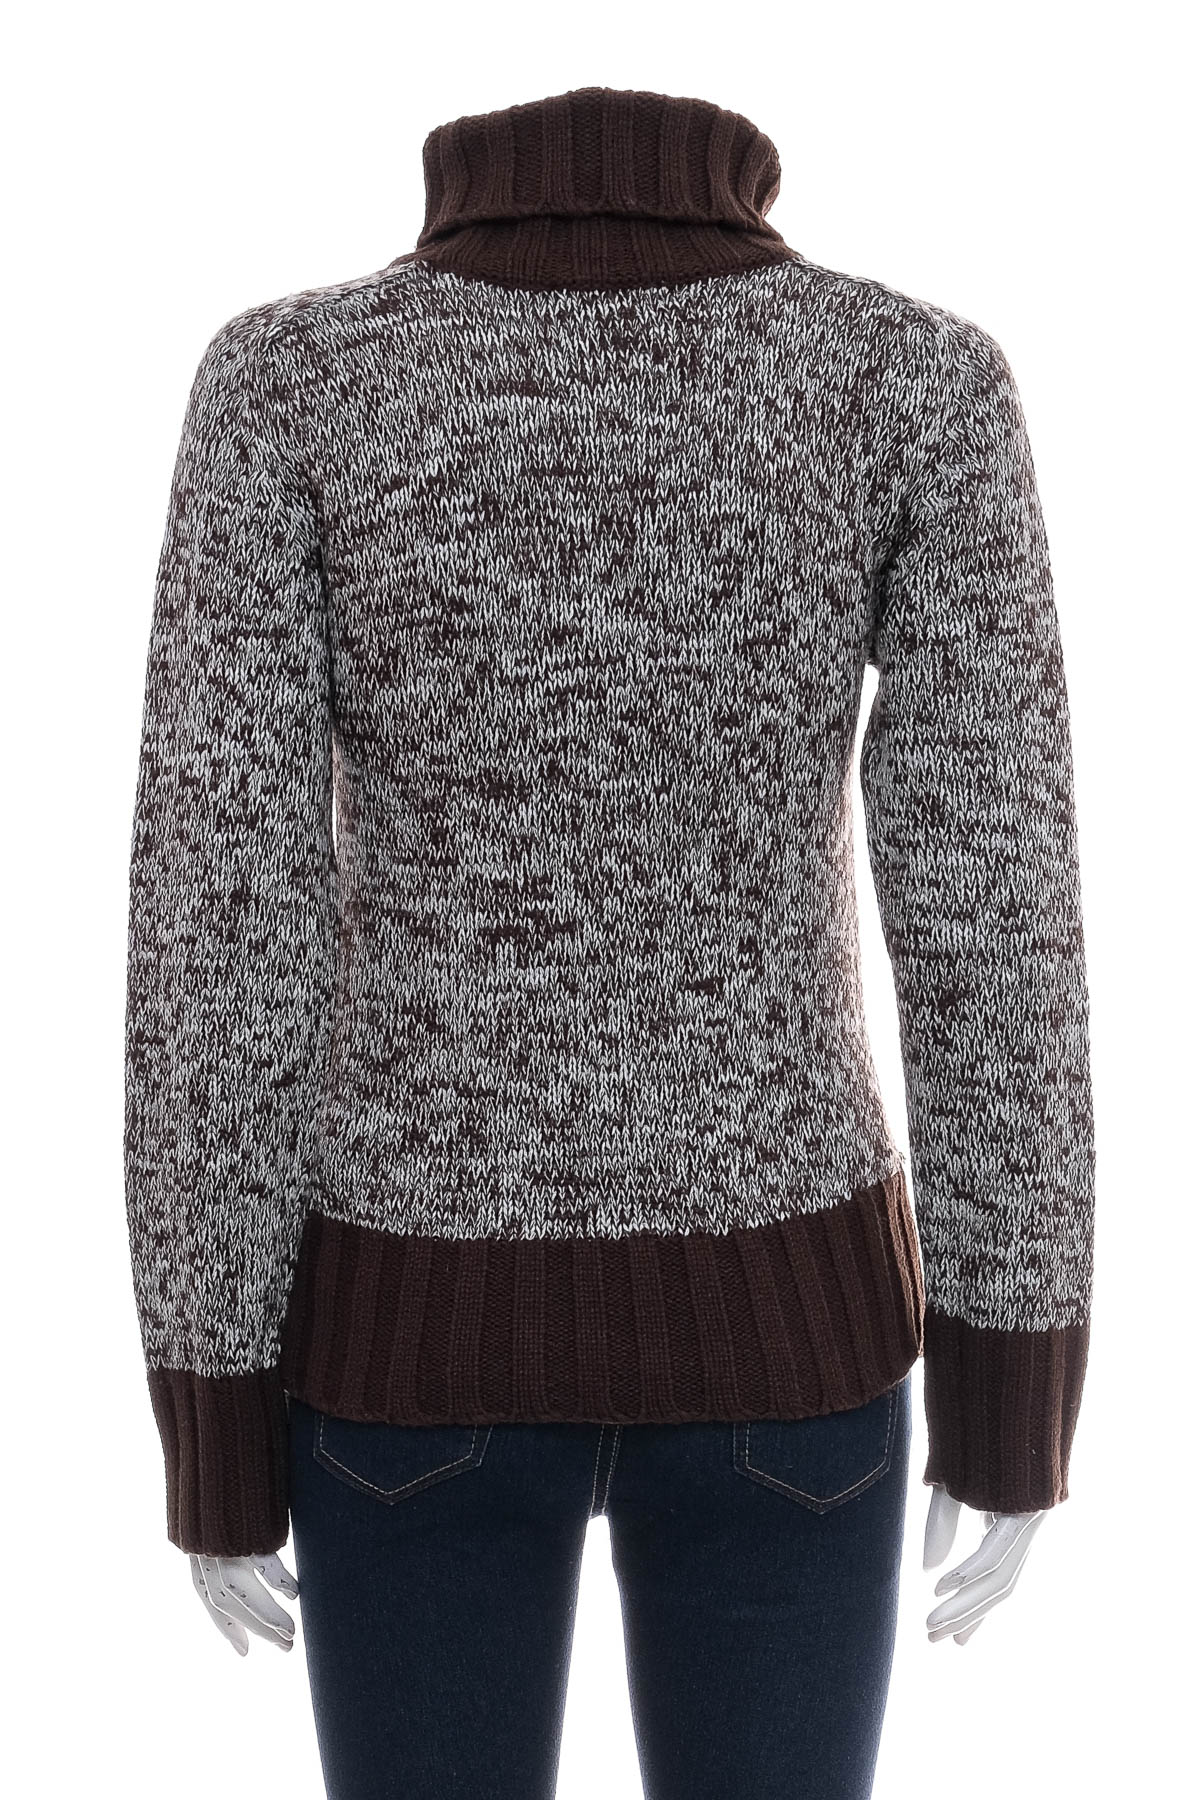 Women's sweater - Editions - 1